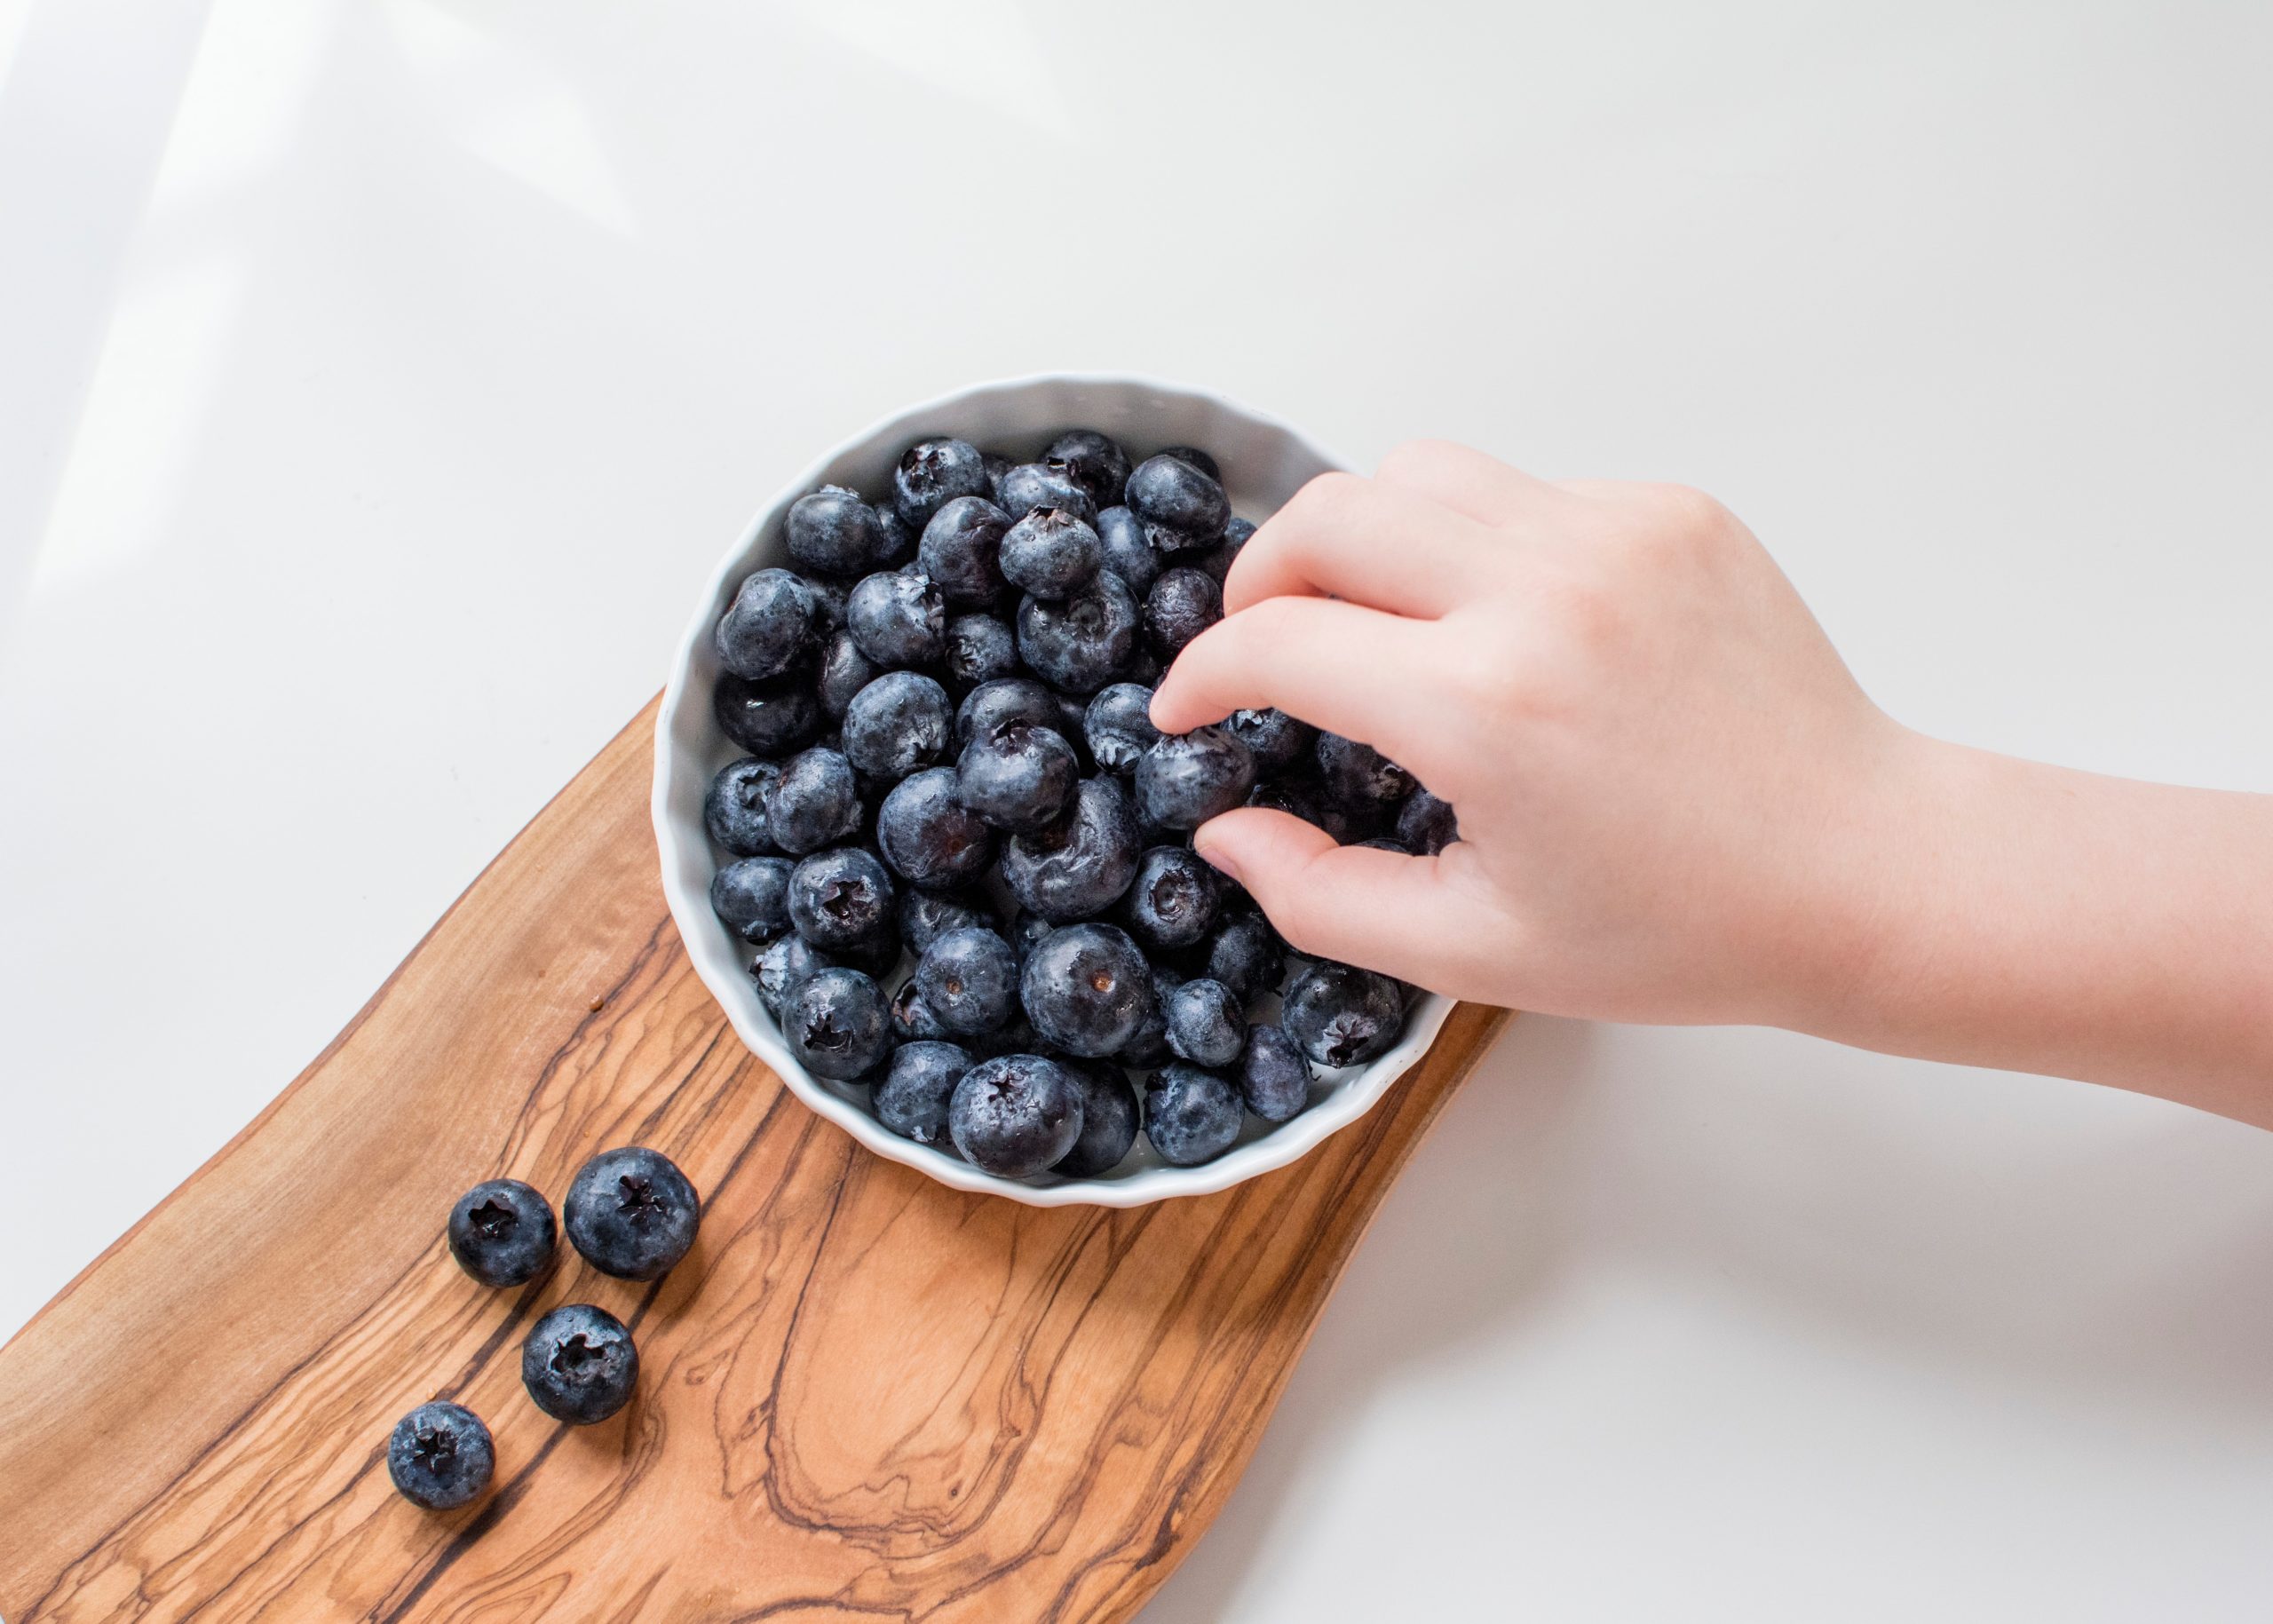 A child's hand receiving sensory stimulation through physical therapy by reaching into a bowl of blueberries.